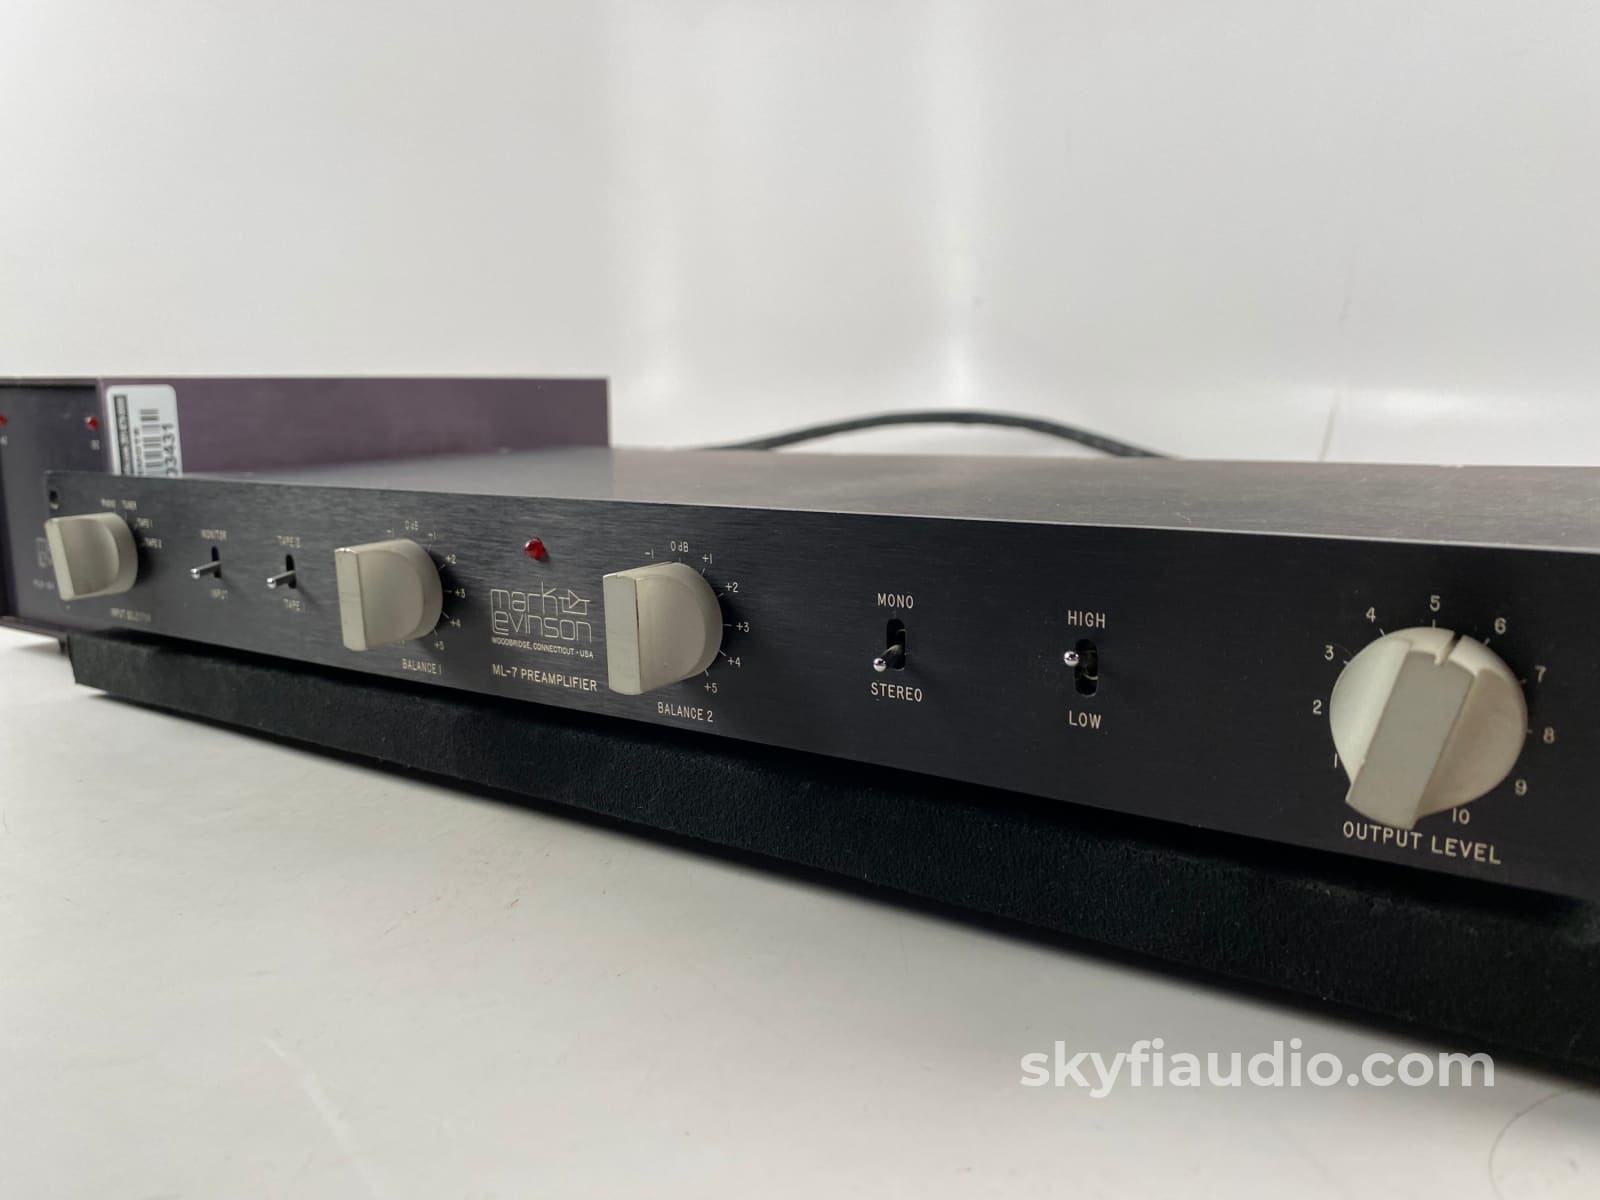 Mark Levinson Ml-7 Vintage Analog Preamp - With Phono Stage Preamplifier